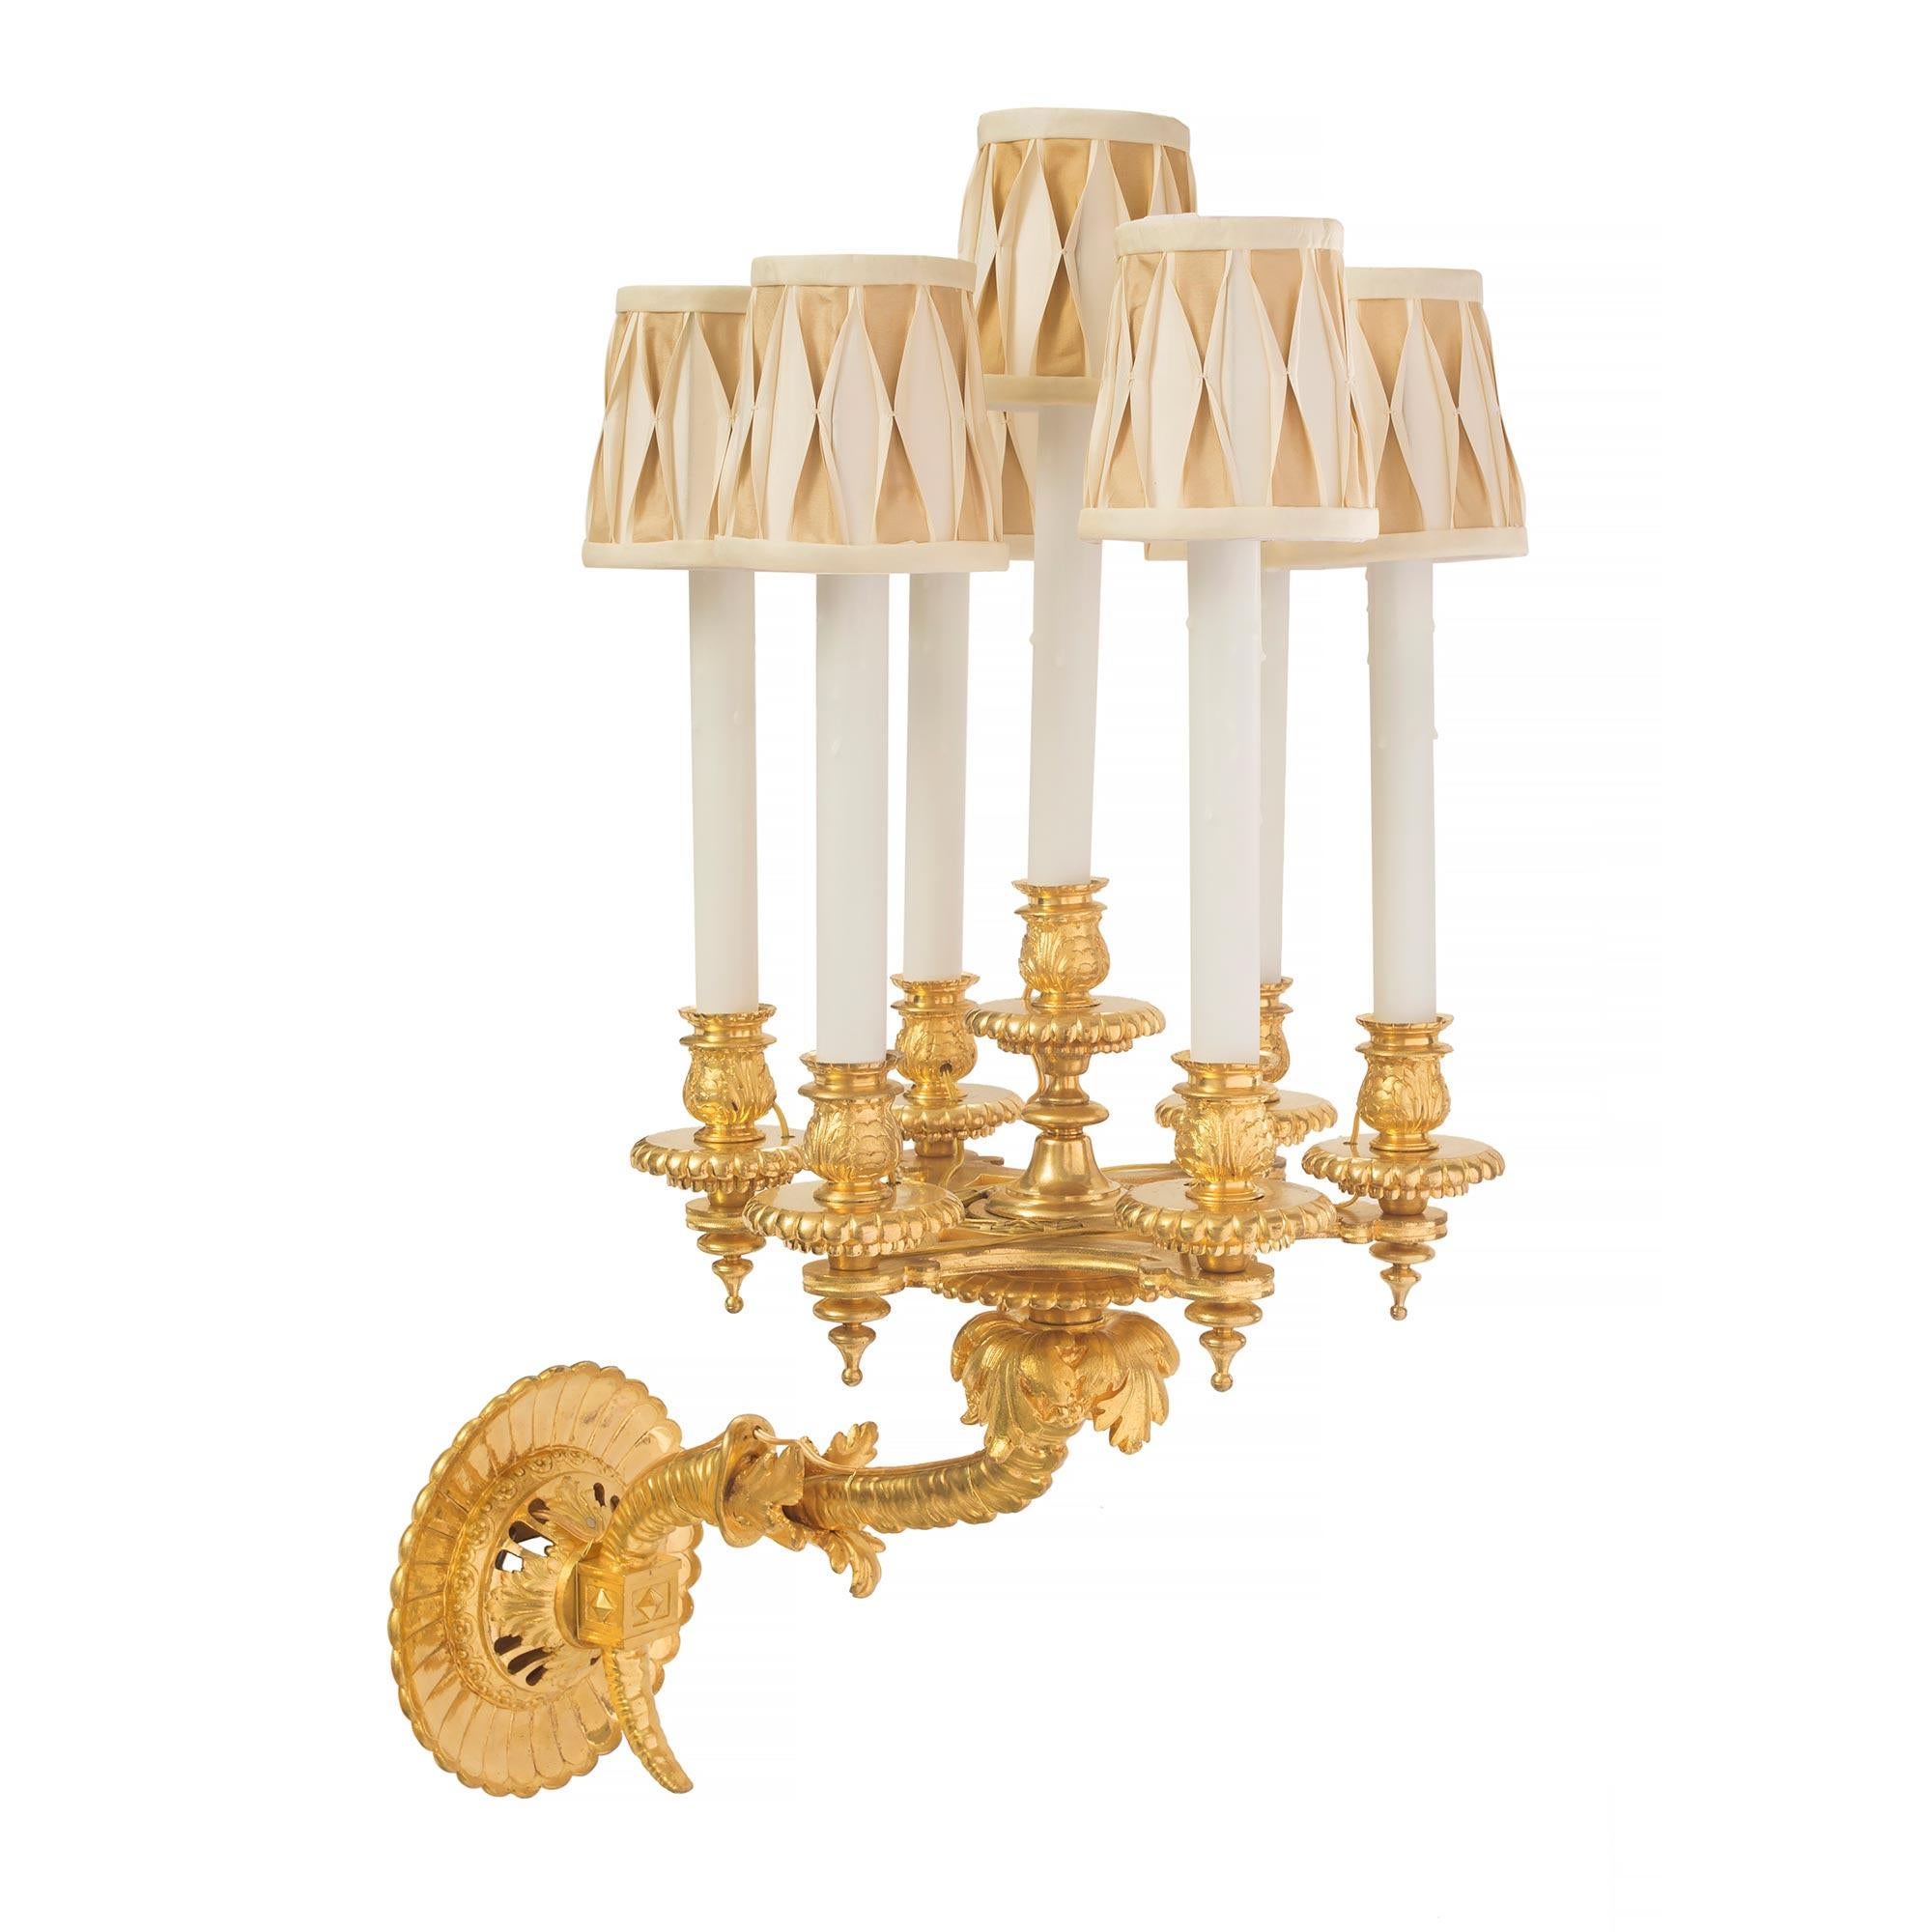 A stunning pair of French 19th century Louis Philippe St. seven-arm ormolu sconces. Each sconce displays a most decorative reeded back plate and an elegant scrolled support, in the shape of a cornucopia, has finely detailed foliate accents. Each arm